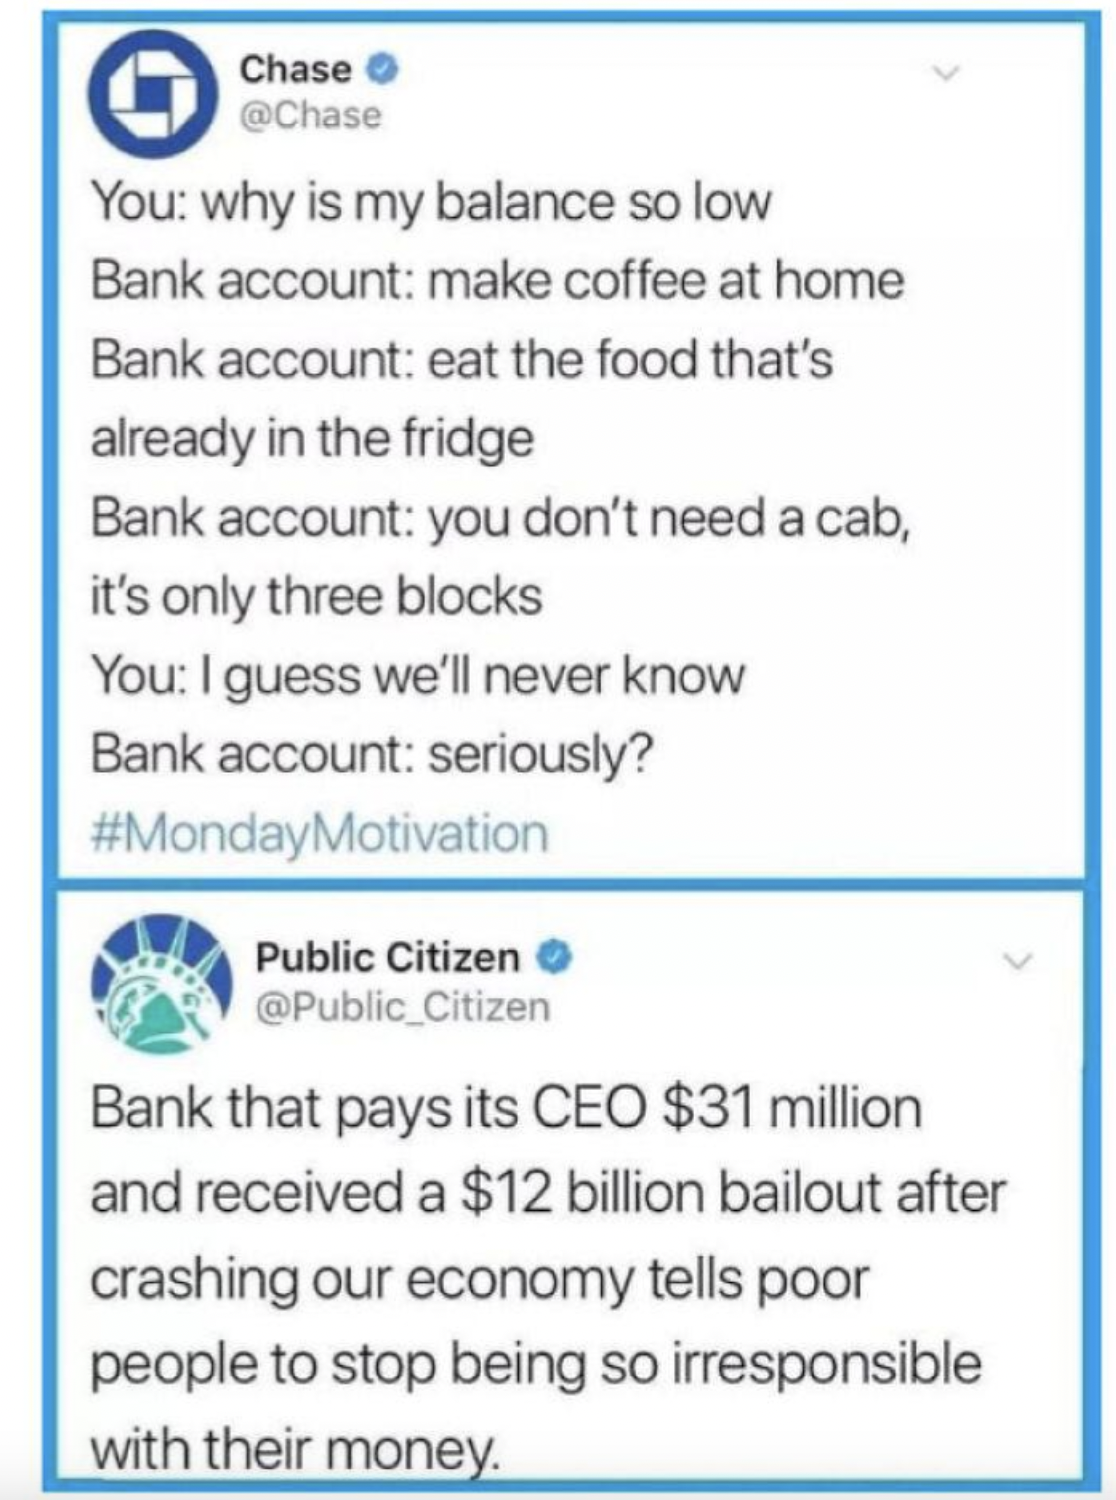 screenshot - 0 Chase You why is my balance so low Bank account make coffee at home Bank account eat the food that's already in the fridge Bank account you don't need a cab, it's only three blocks You I guess we'll never know Bank account seriously? Public